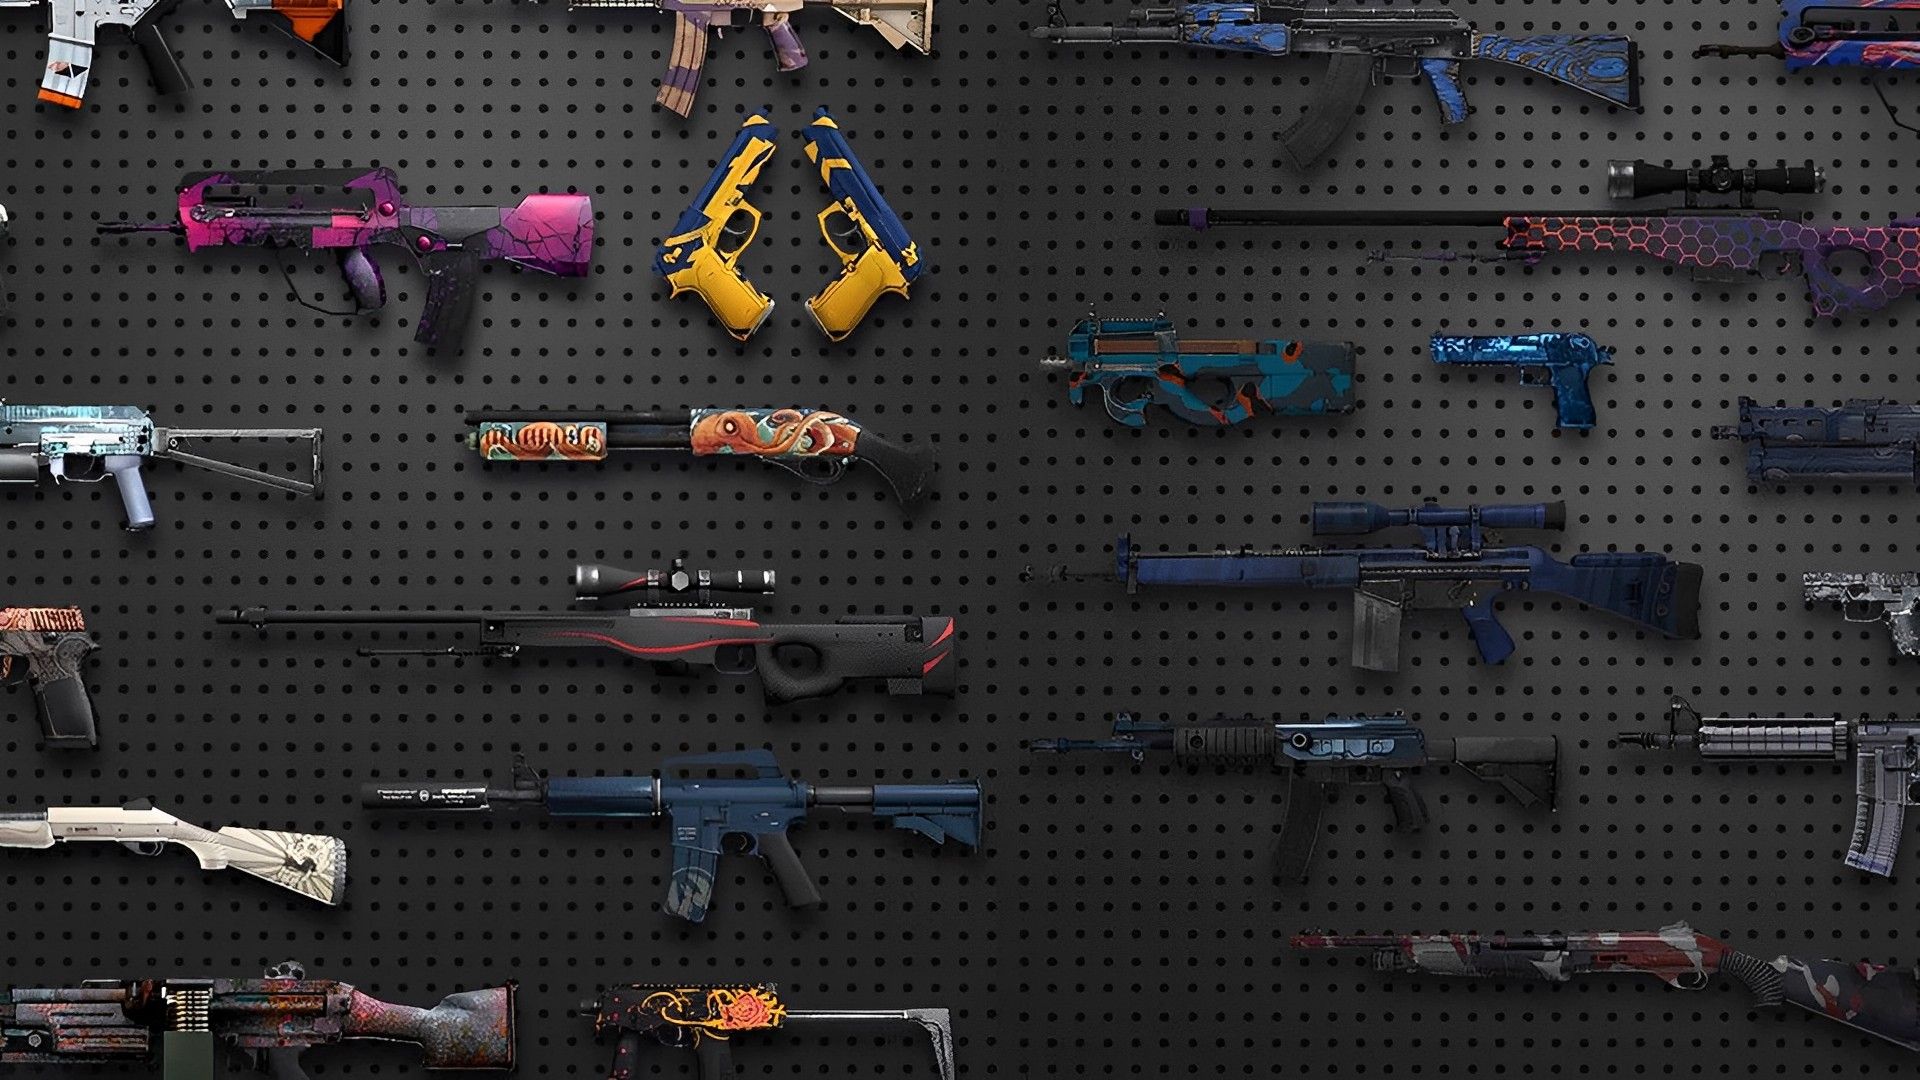 How to sell CSGO skins for real money